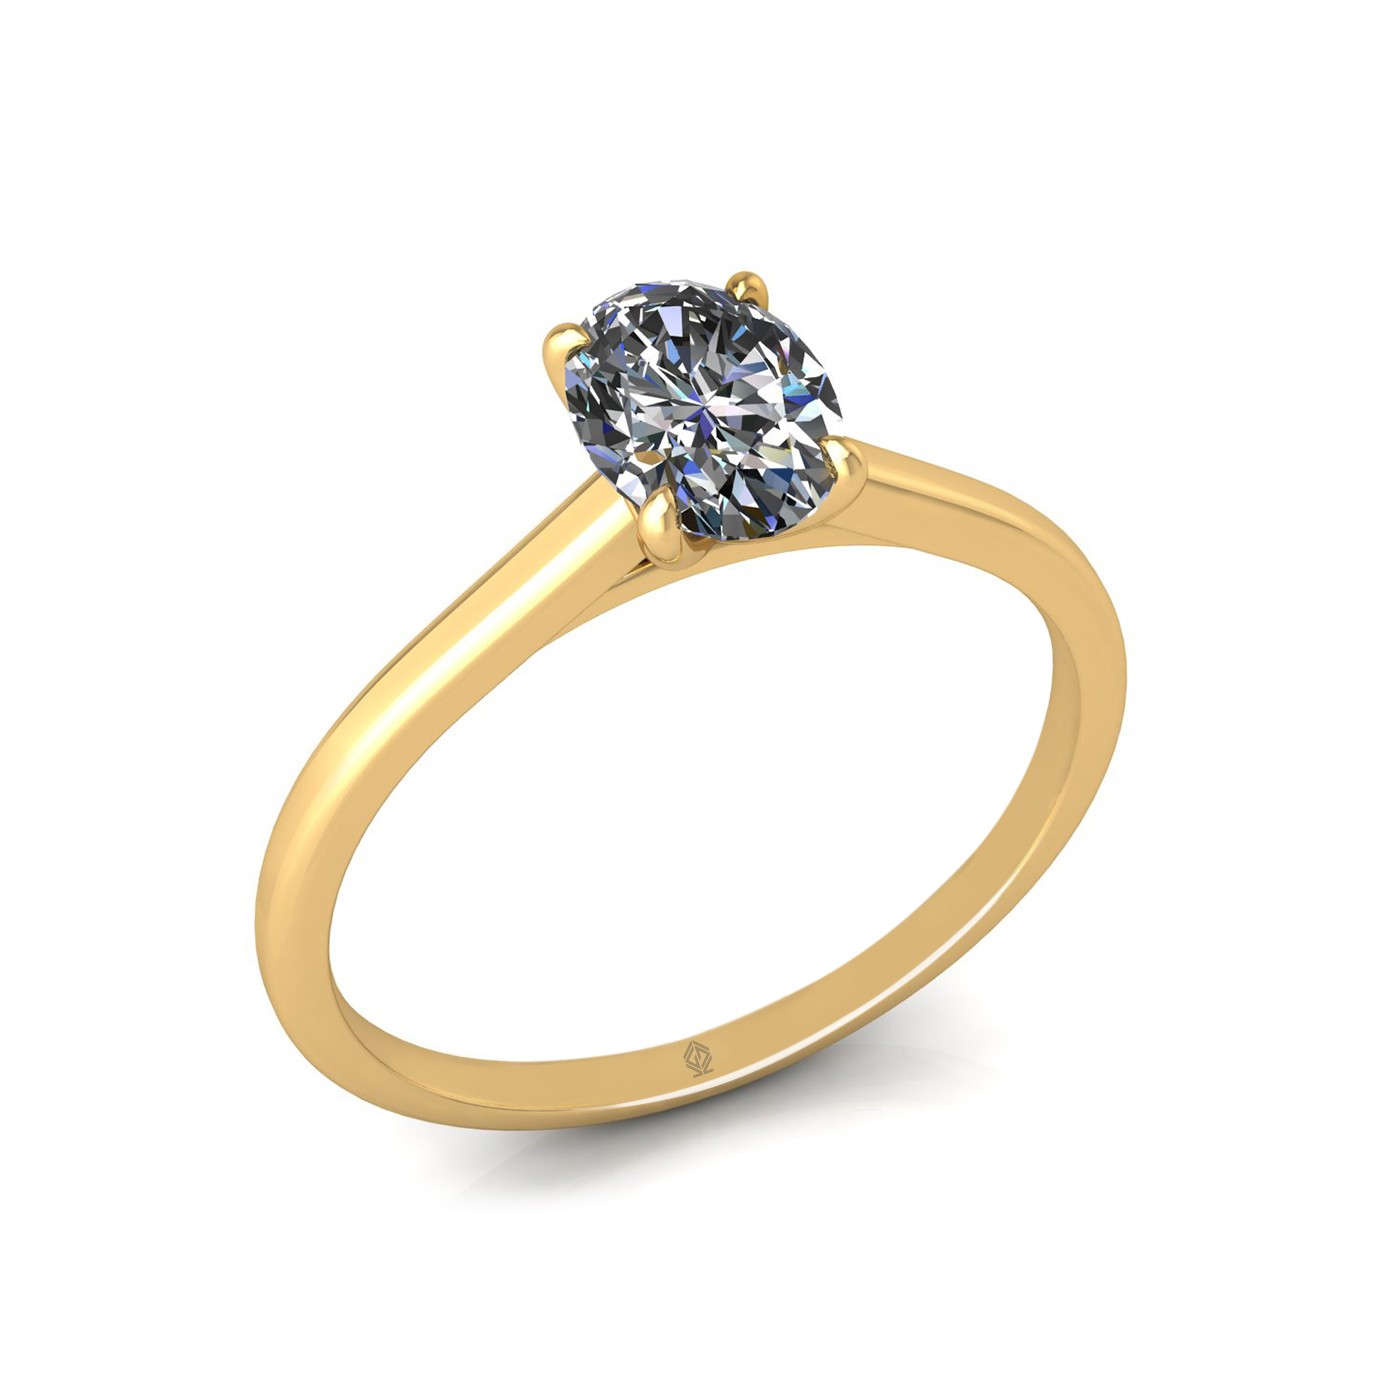 18k yellow gold  0,80 ct 4 prongs solitaire oval cut diamond engagement ring with whisper thin band